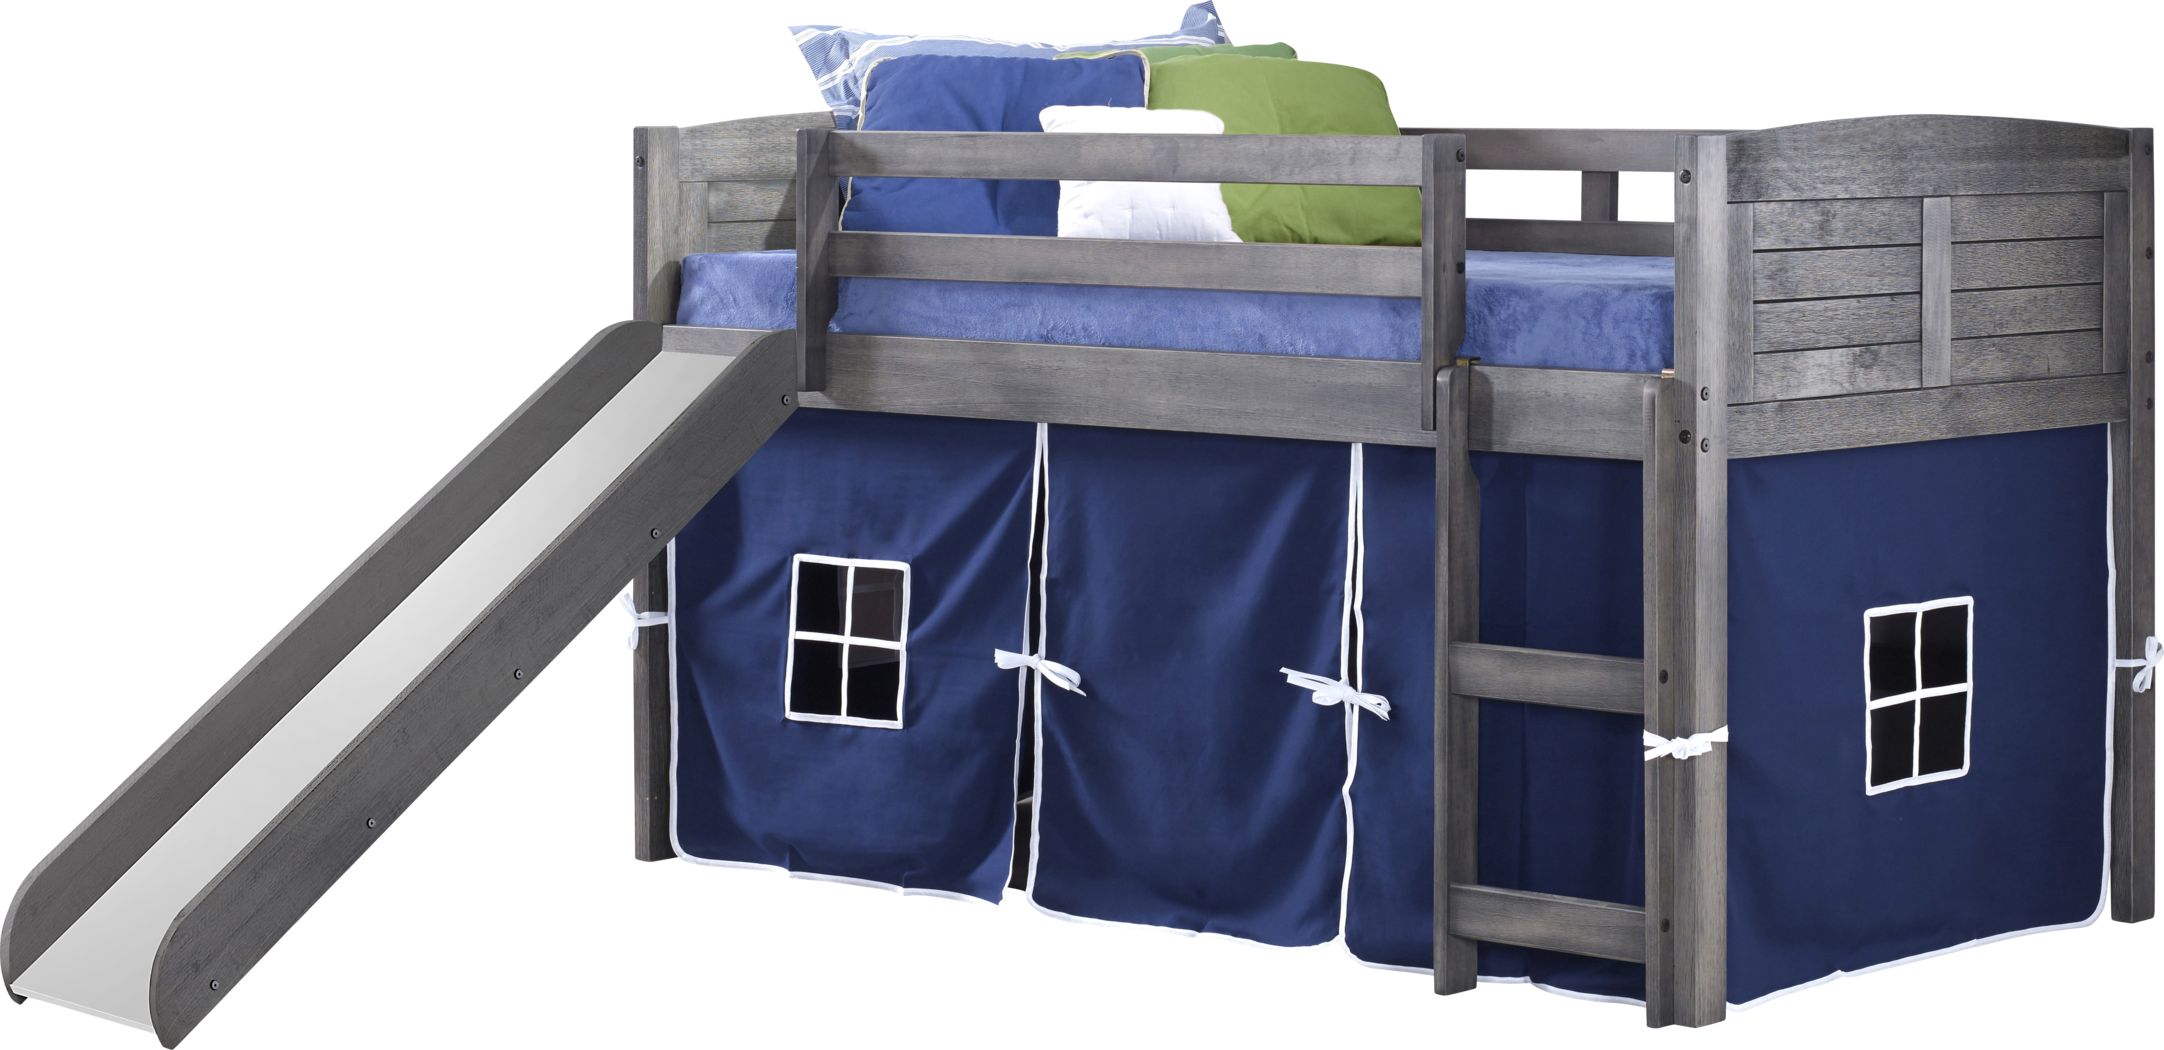 Bunk Beds For Kids, Bunk Beds Rooms To Go Kids